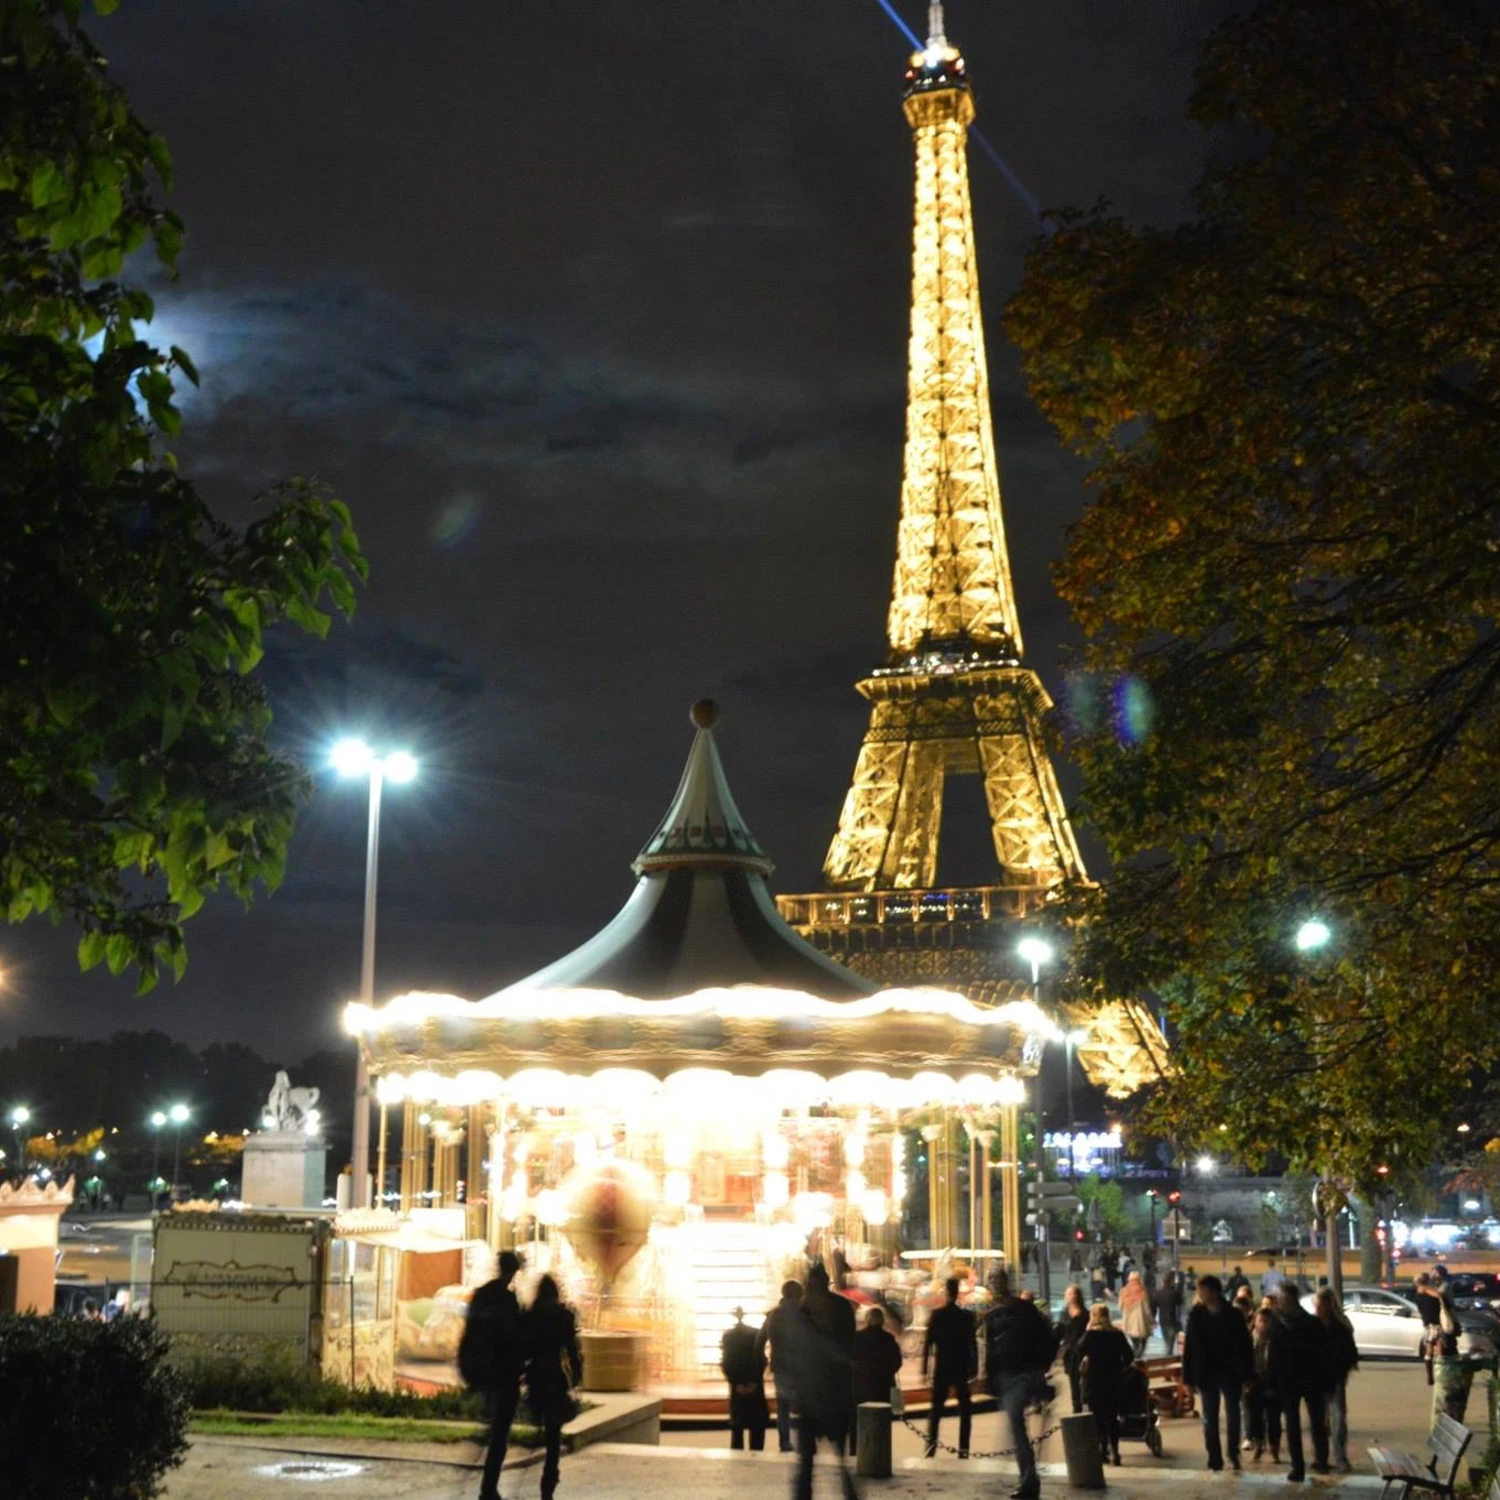 Night view of Eiffel Tower